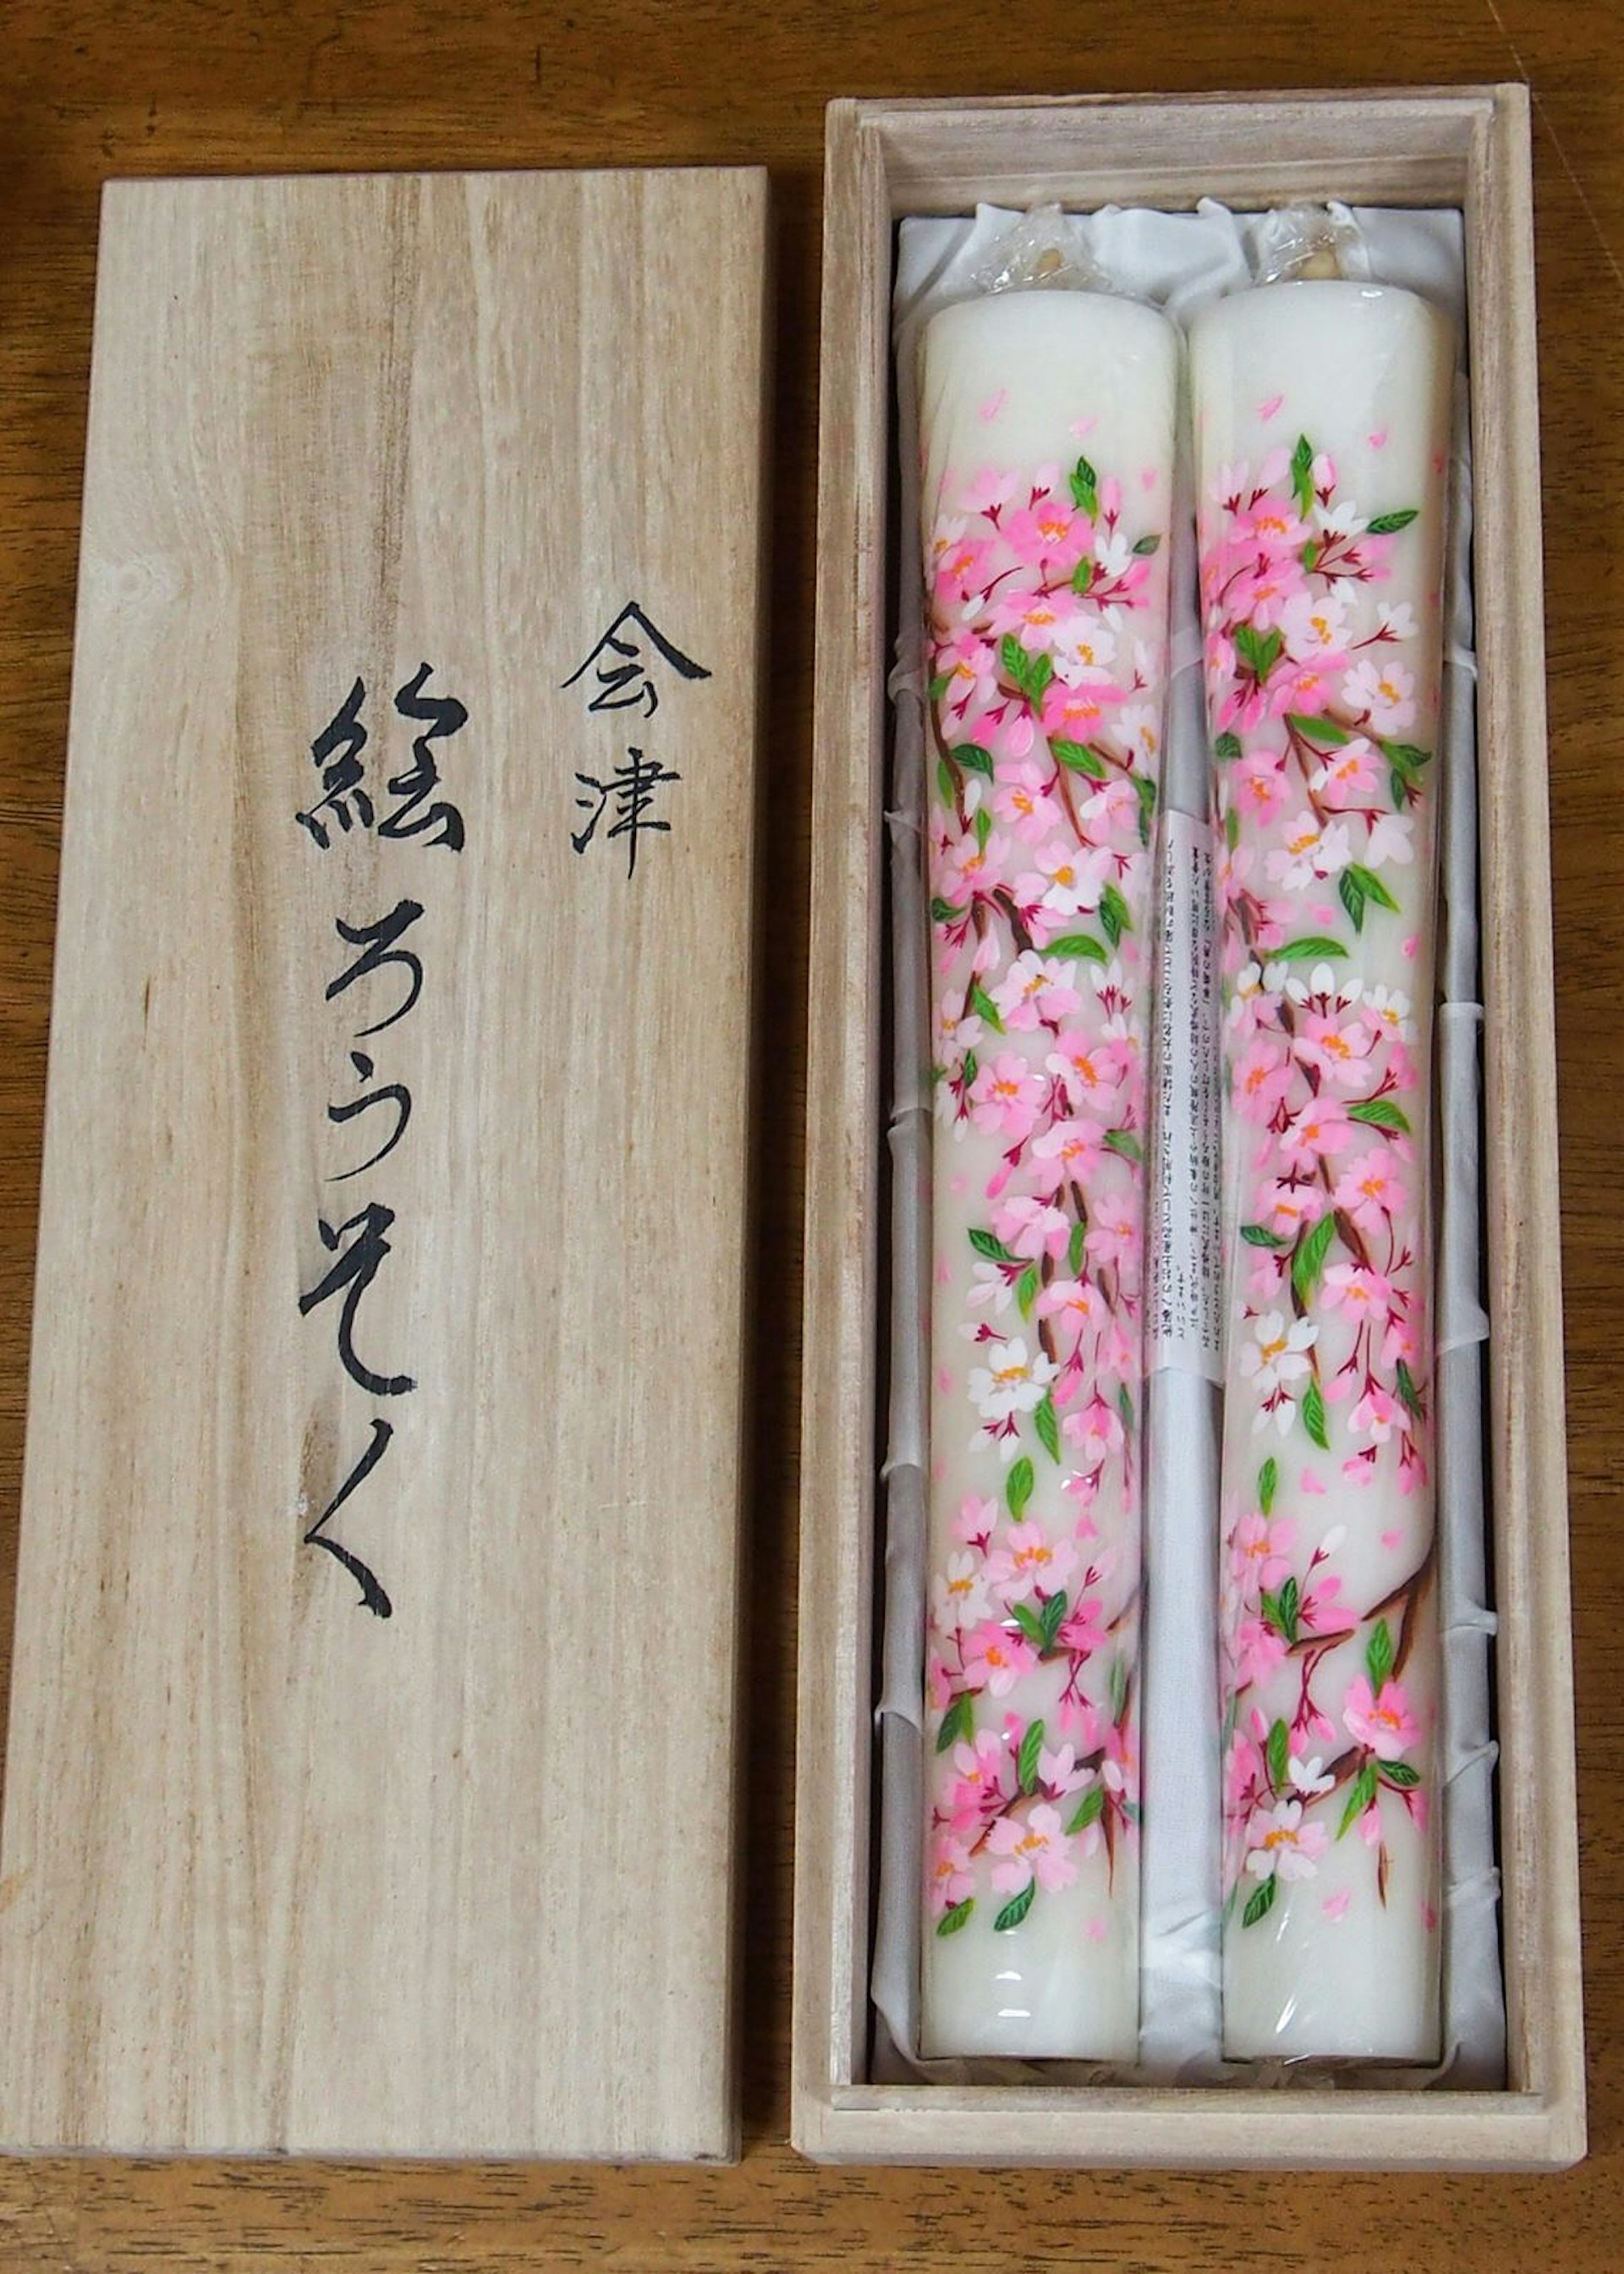 Two Aizu Erōsoku candles, finely painted with pink blossoms, presented in a wooden box at studio Yamada Shōten © Manami Okazaki / Lonely Planet